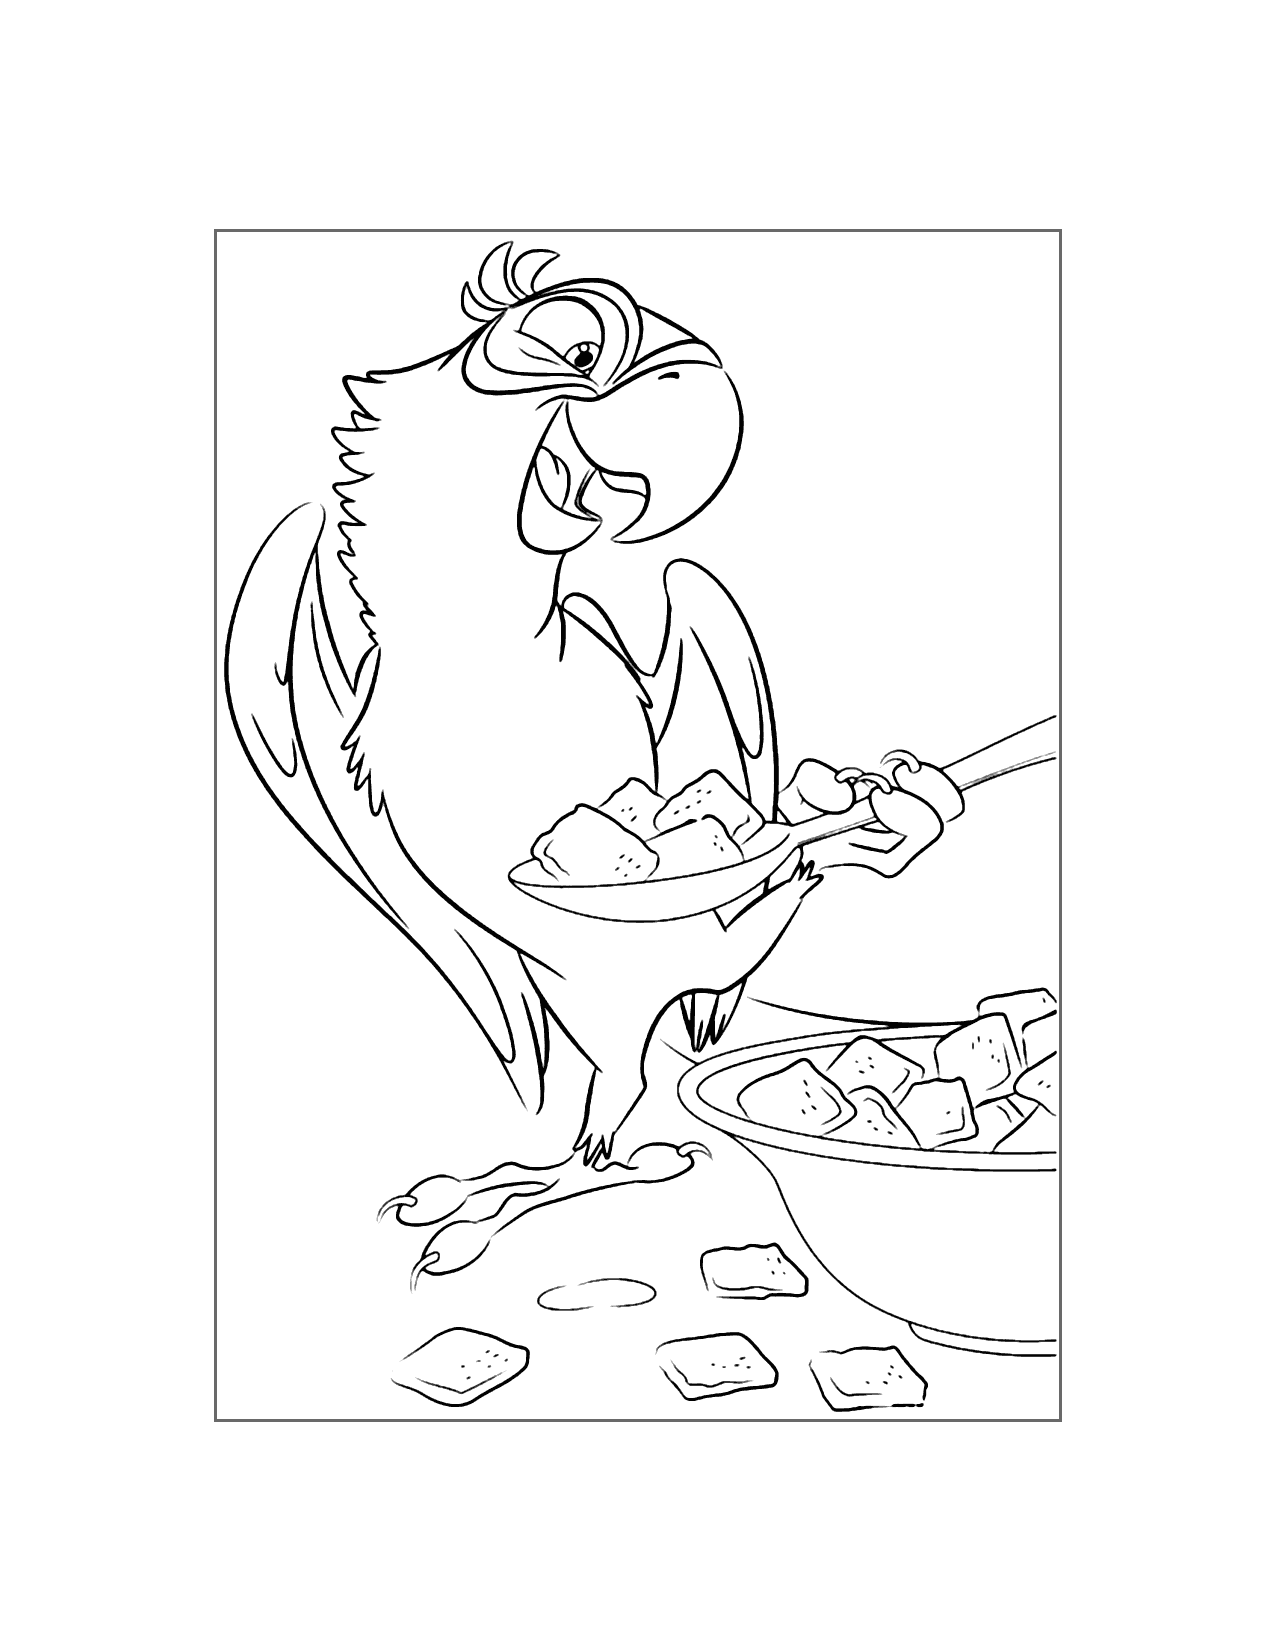 Blu Eats With A Spoon Rio Coloring Page